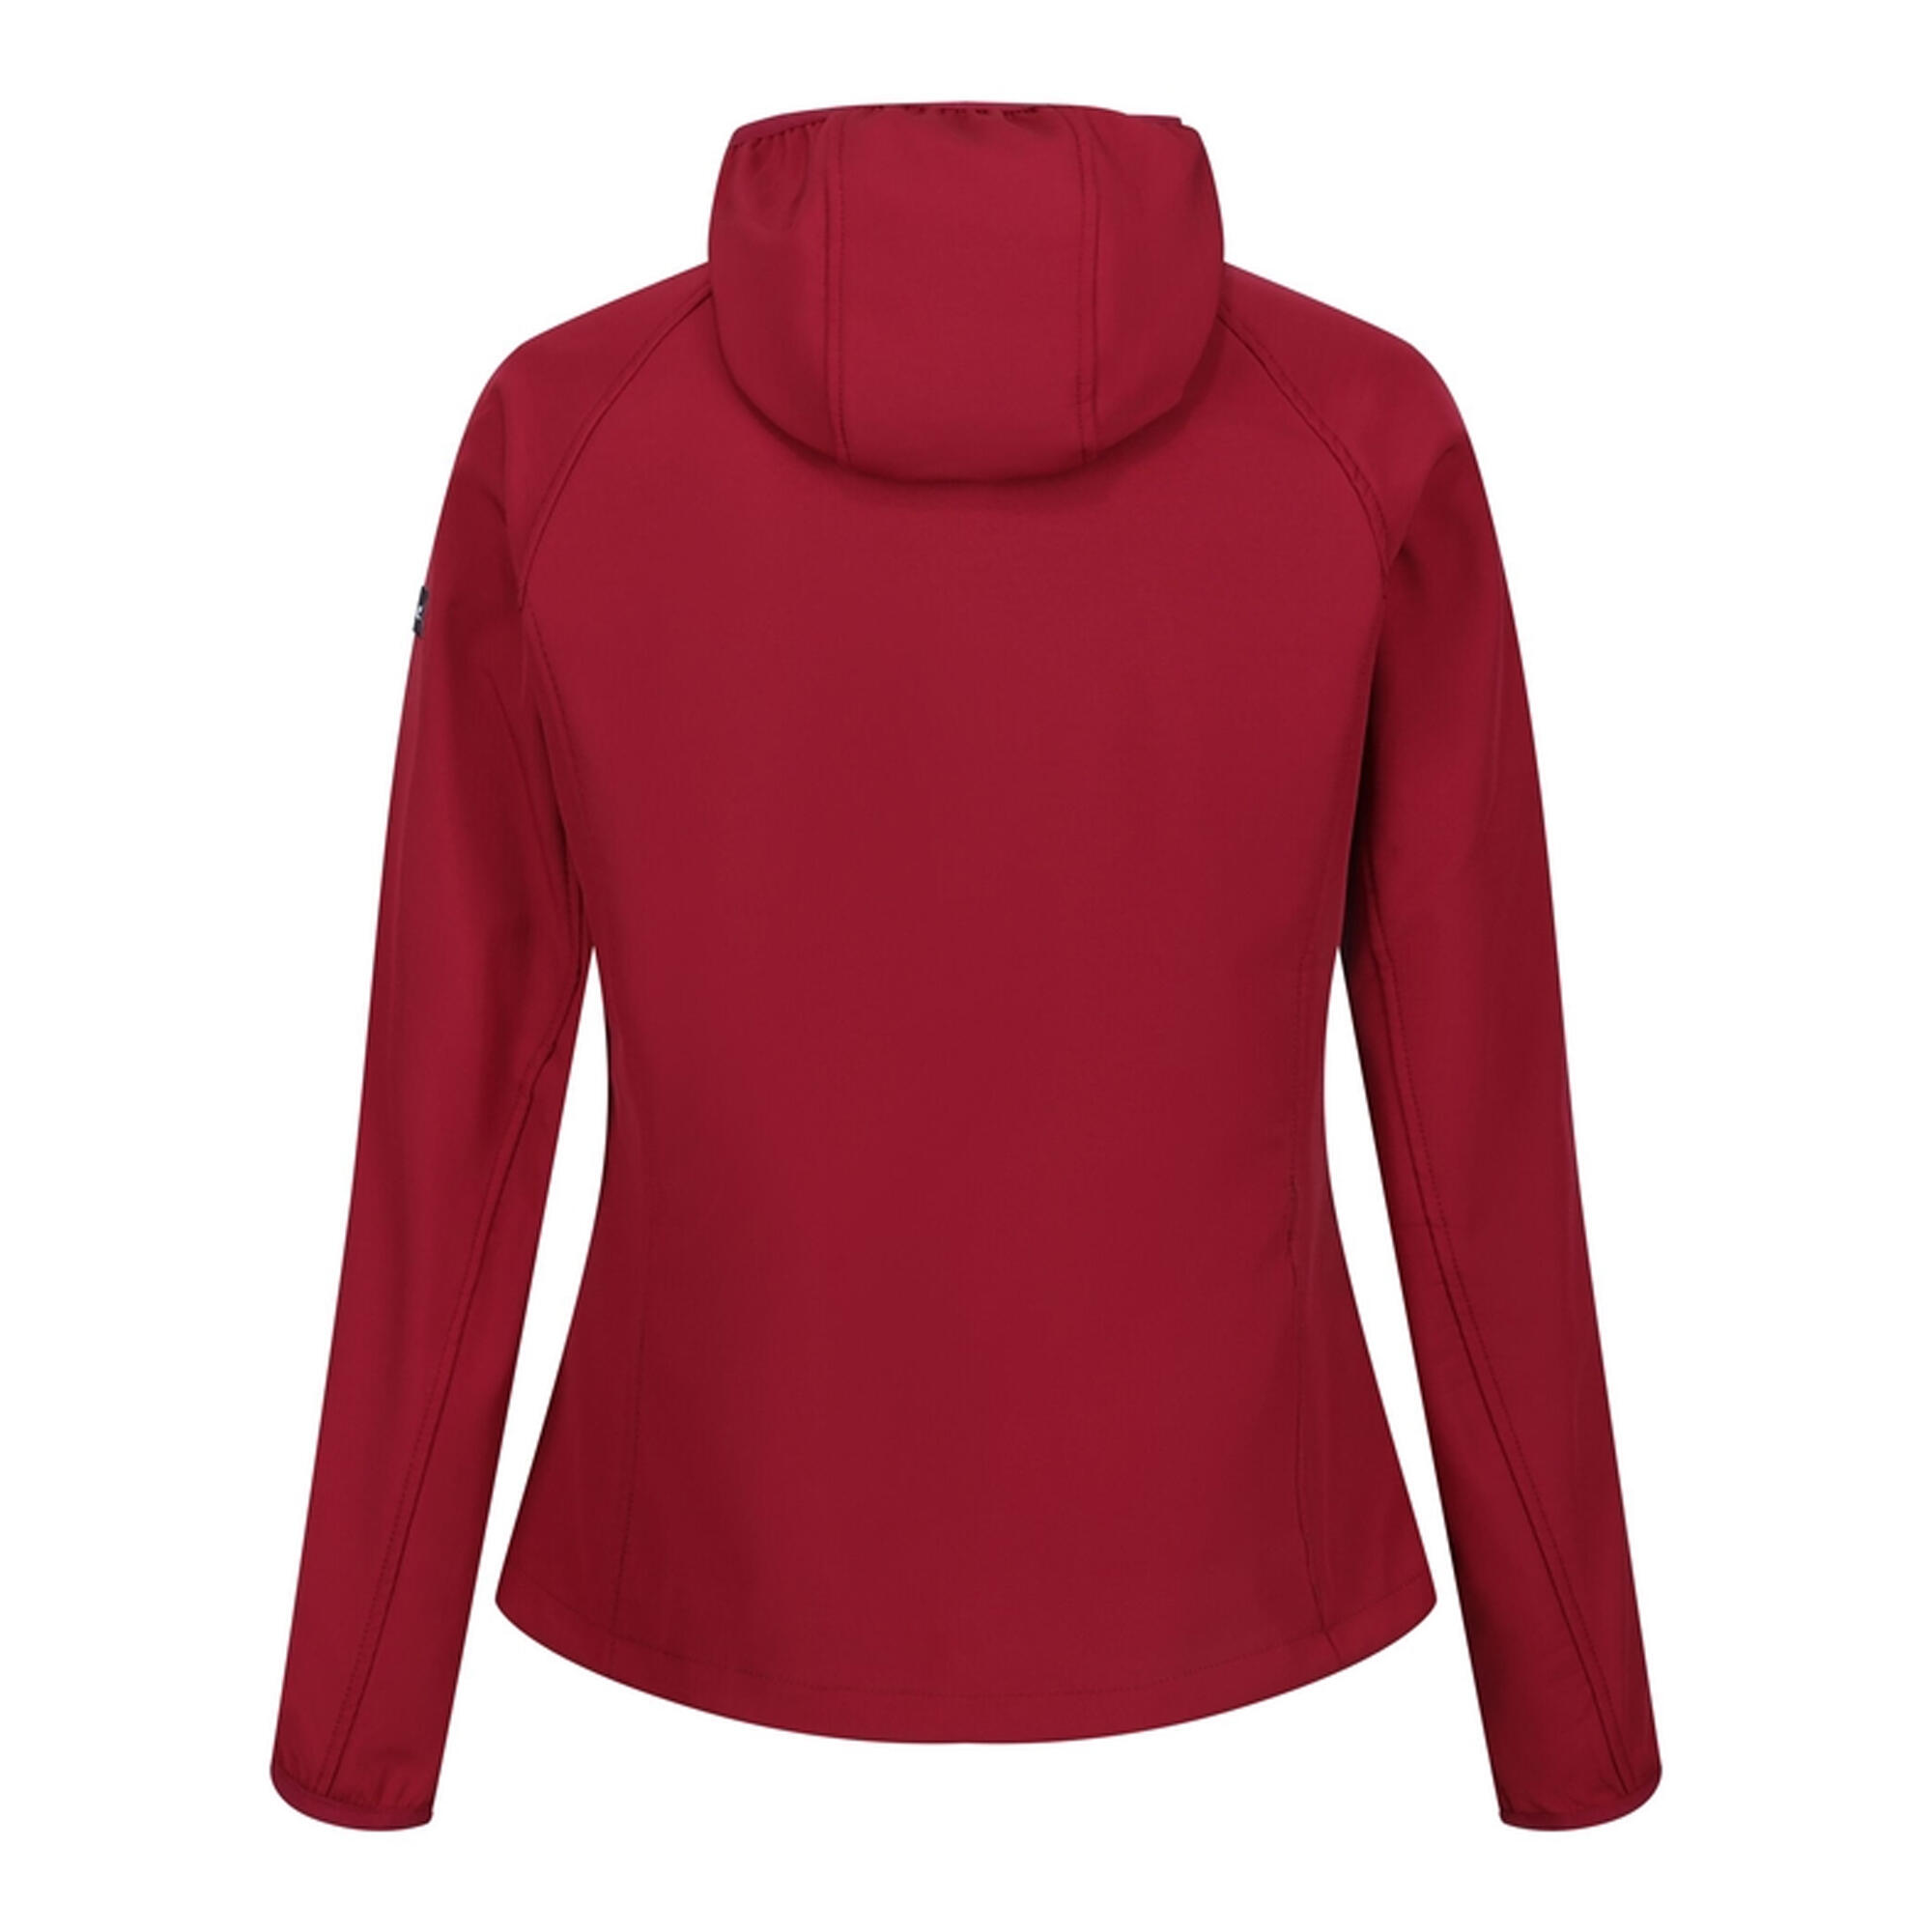 Womens/Ladies Ared III Soft Shell Jacket (Rumba Red) 2/4